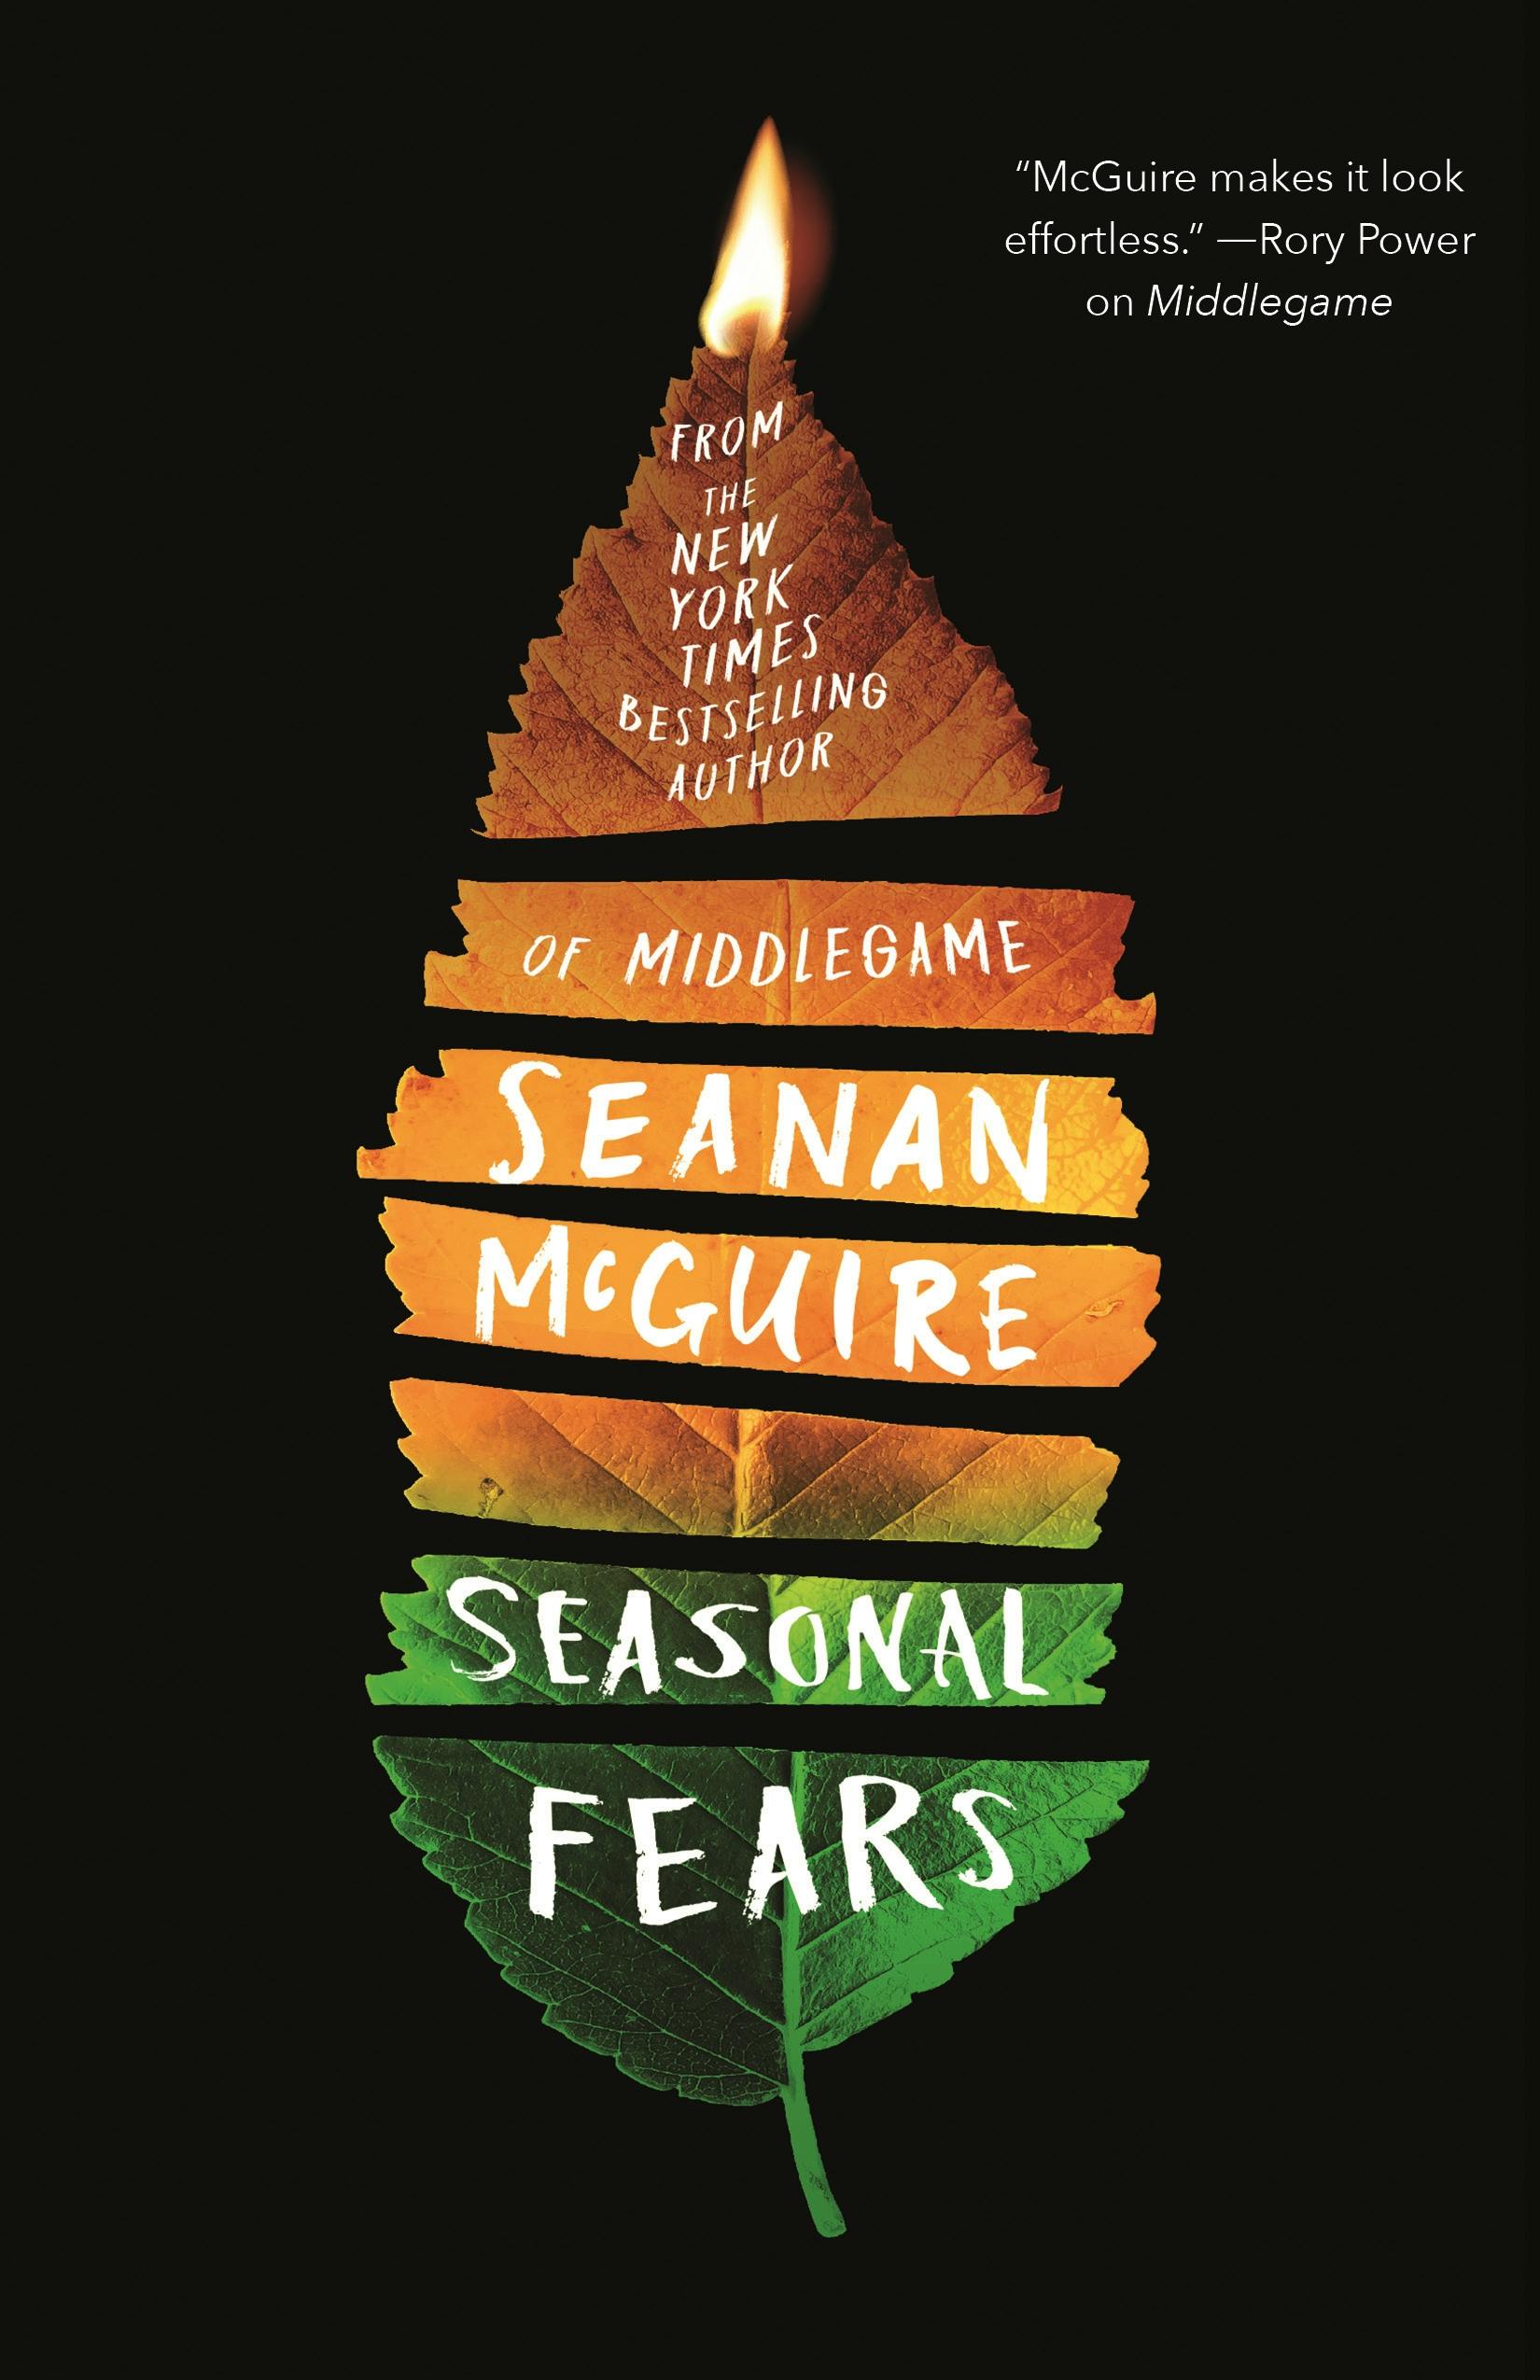 Cover for the book titled as: Seasonal Fears